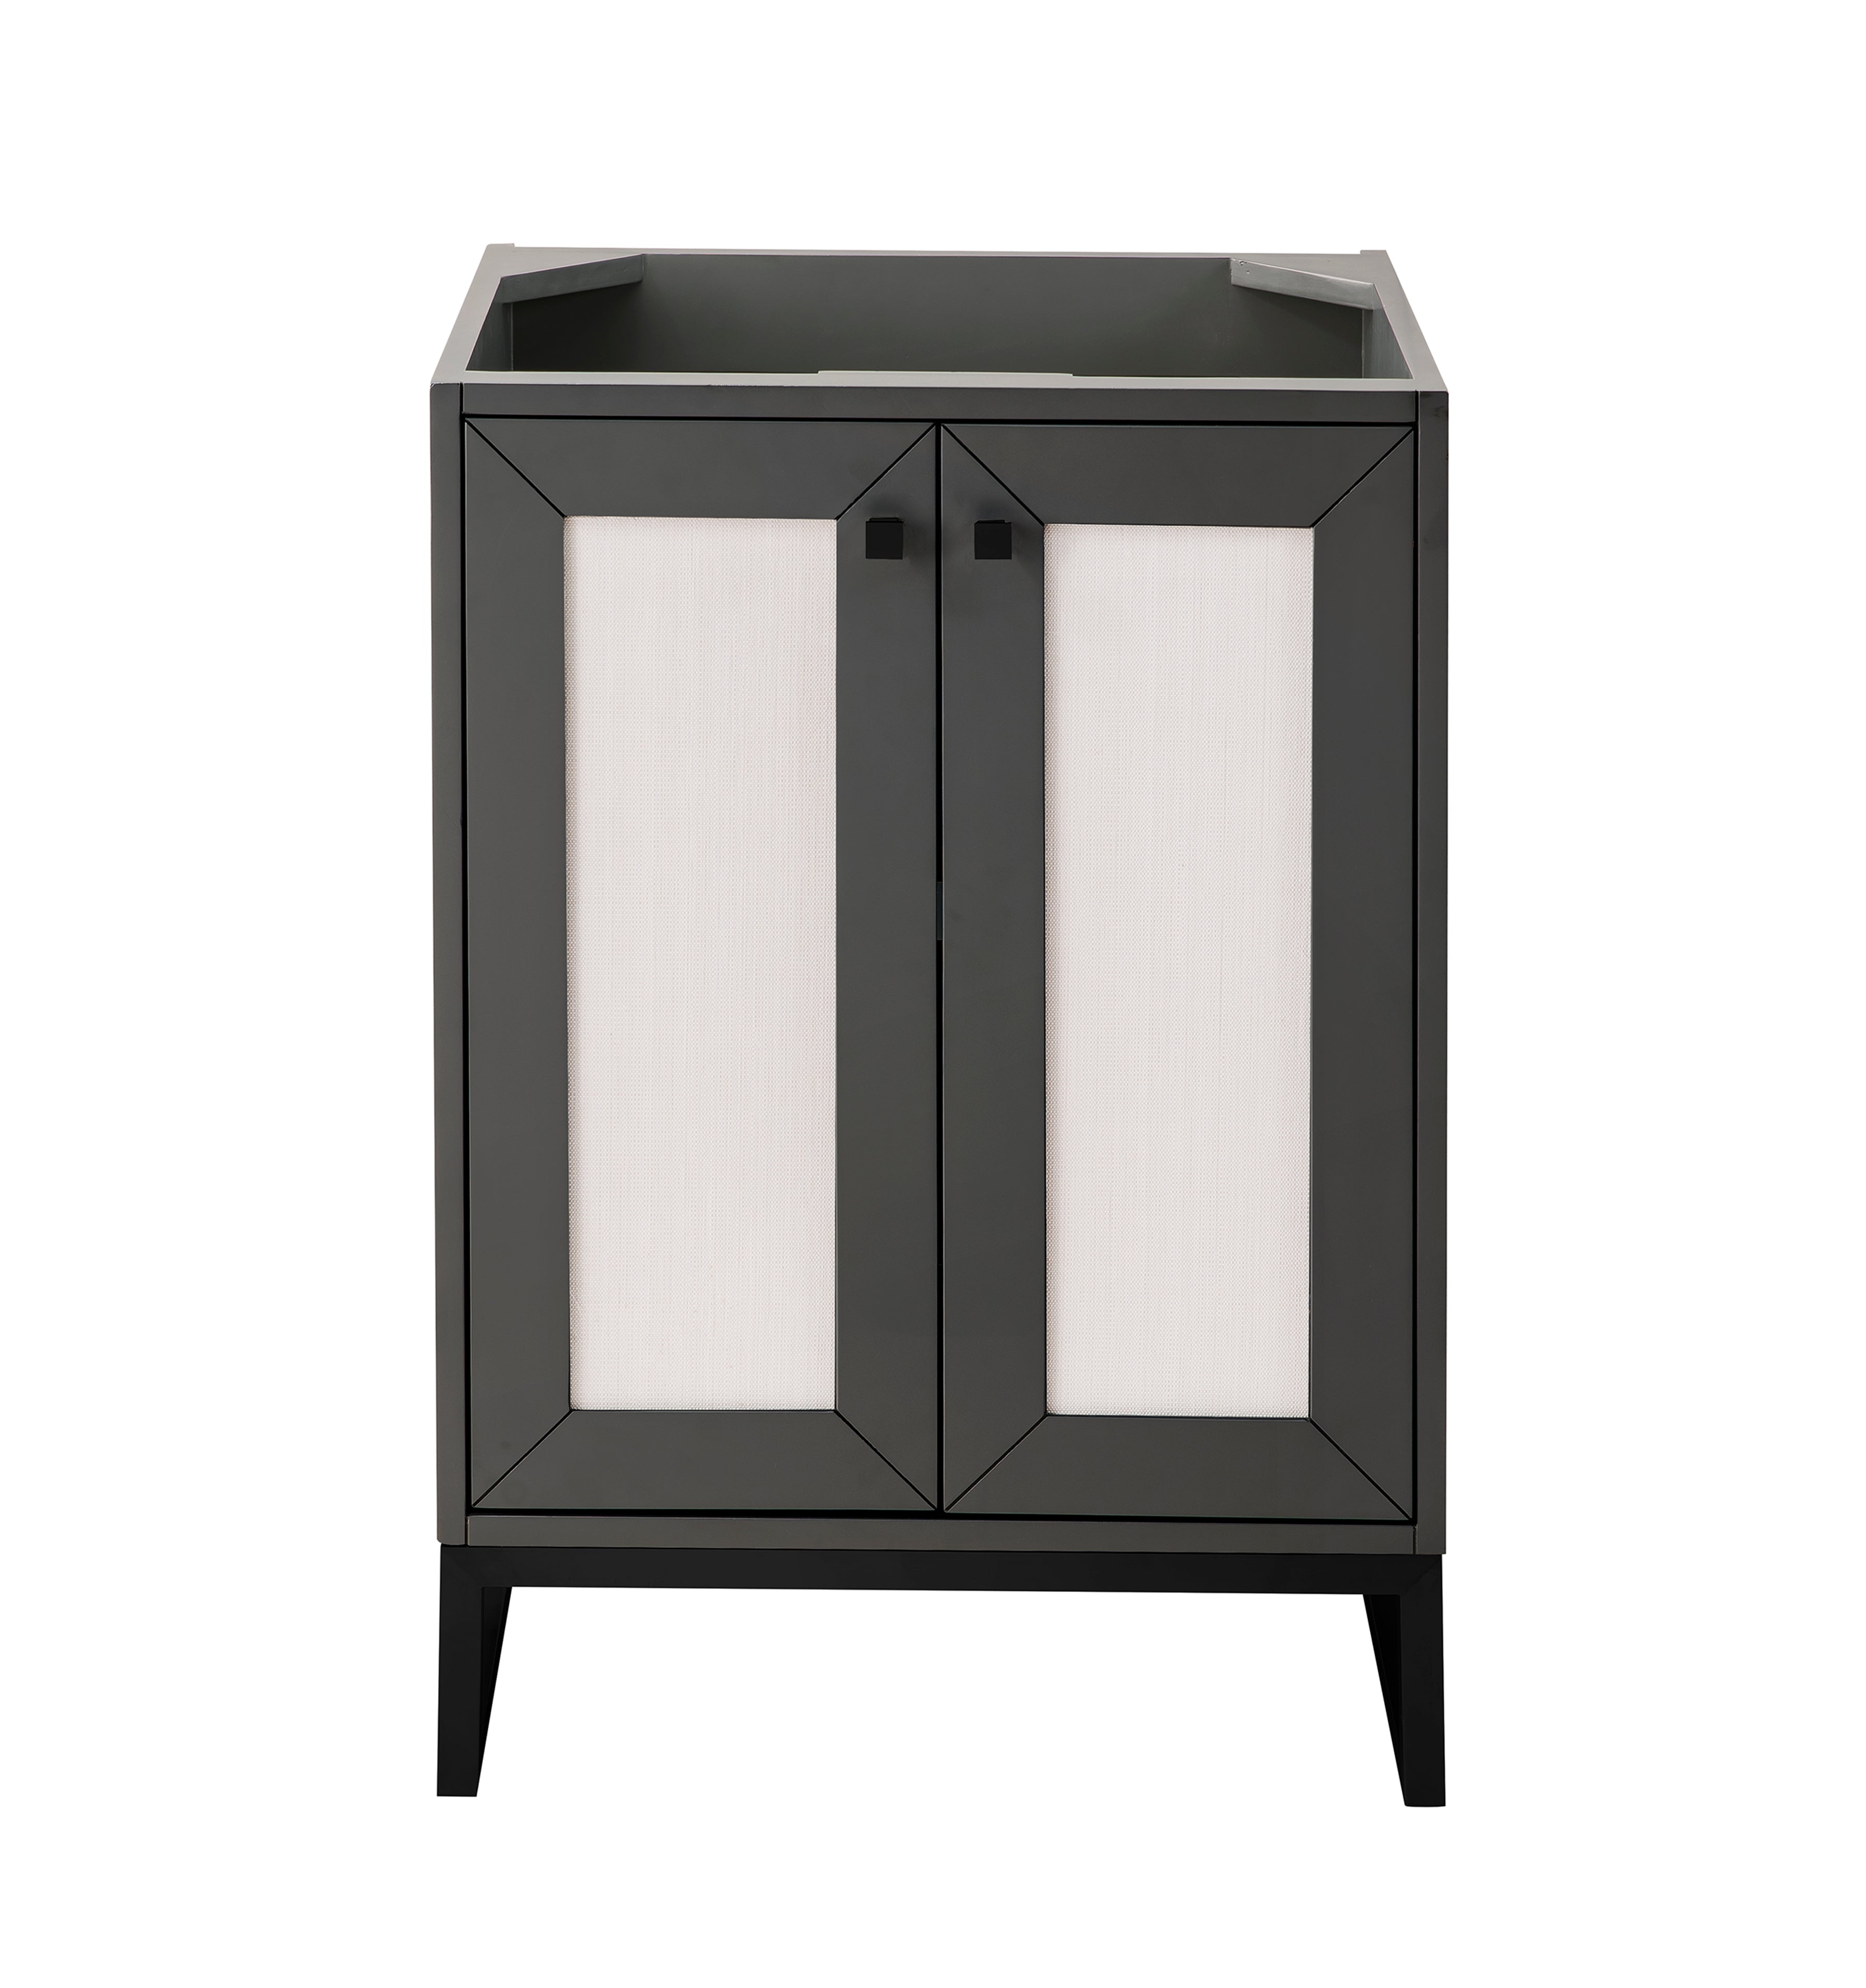 mineral gray Vanity Cabinet